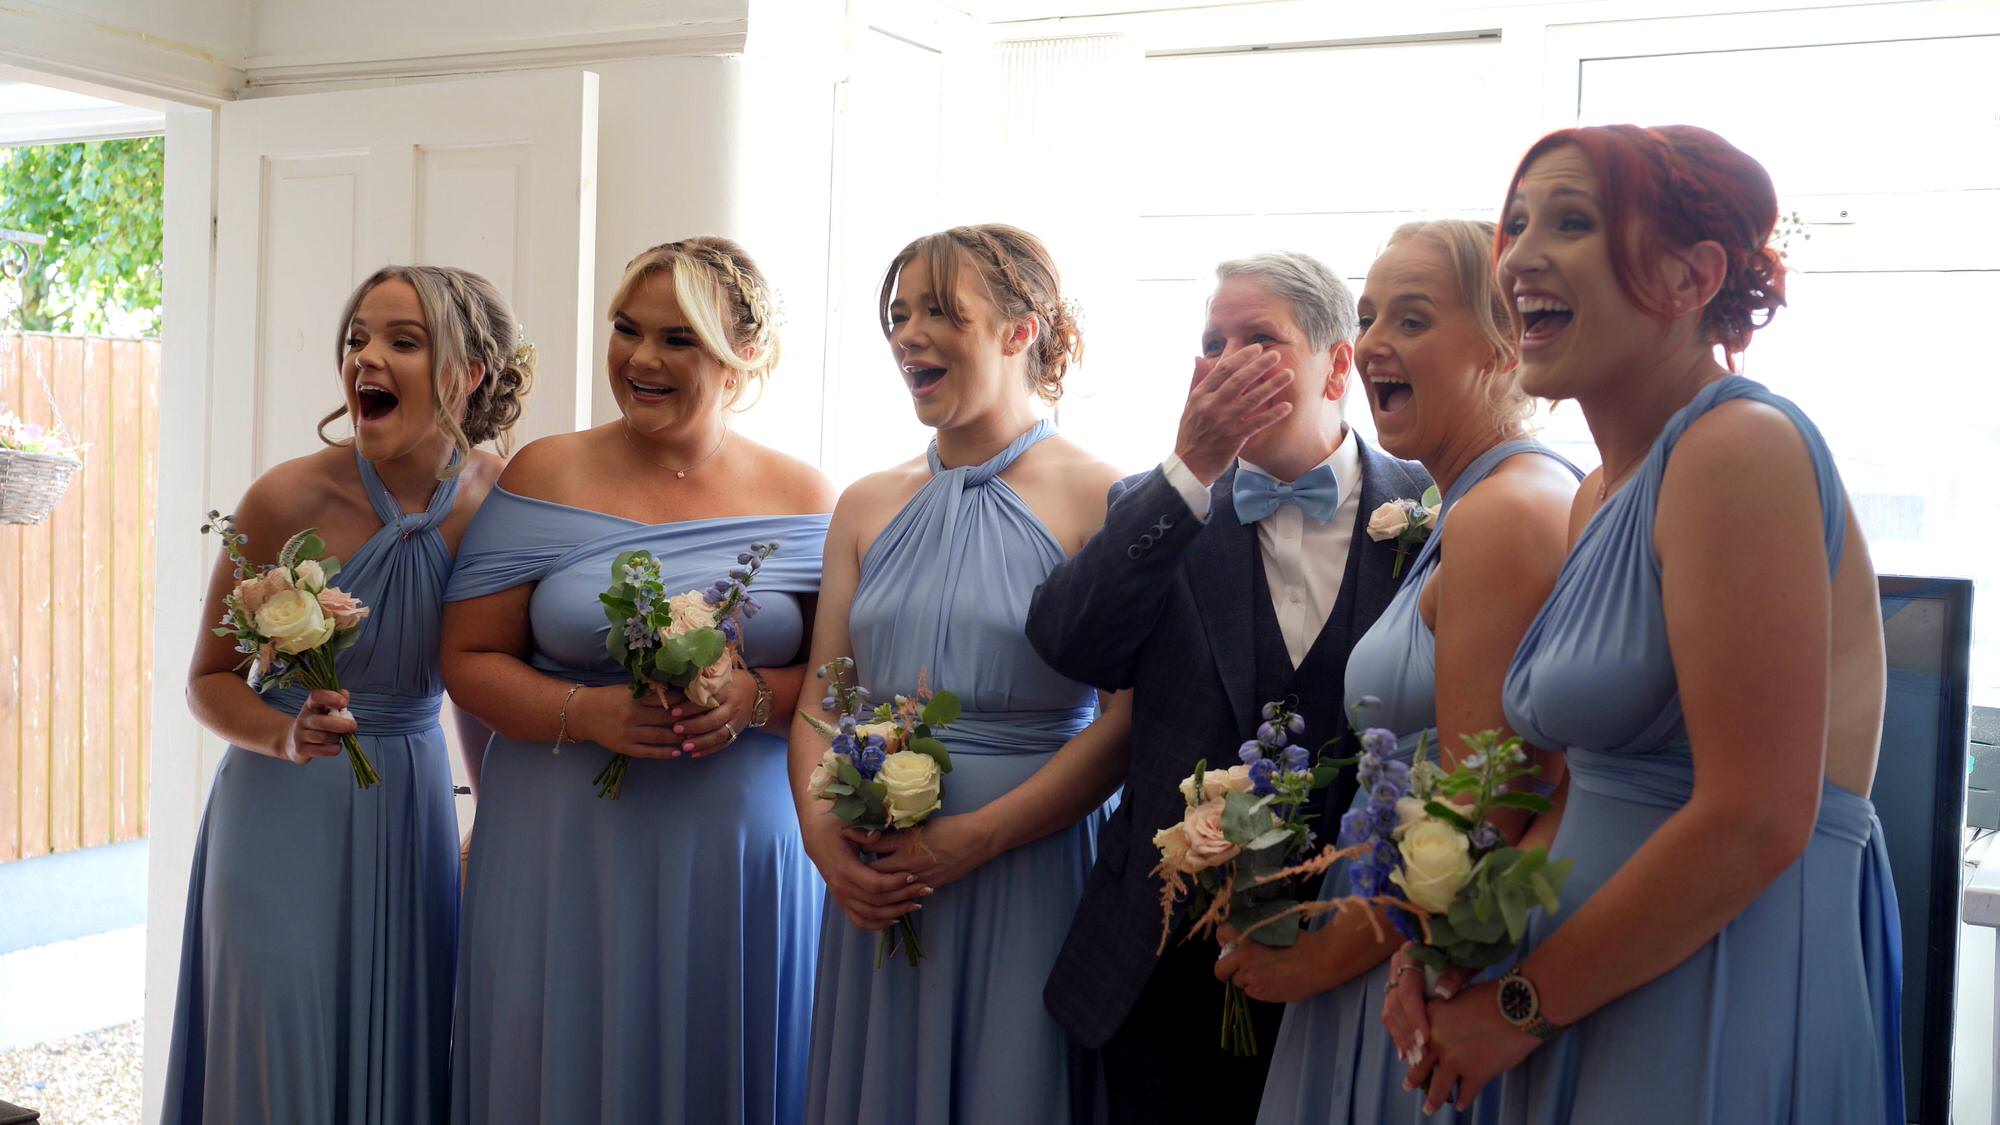 a videographer captures the reaction of the bridesmaids seeing the bride for the first time